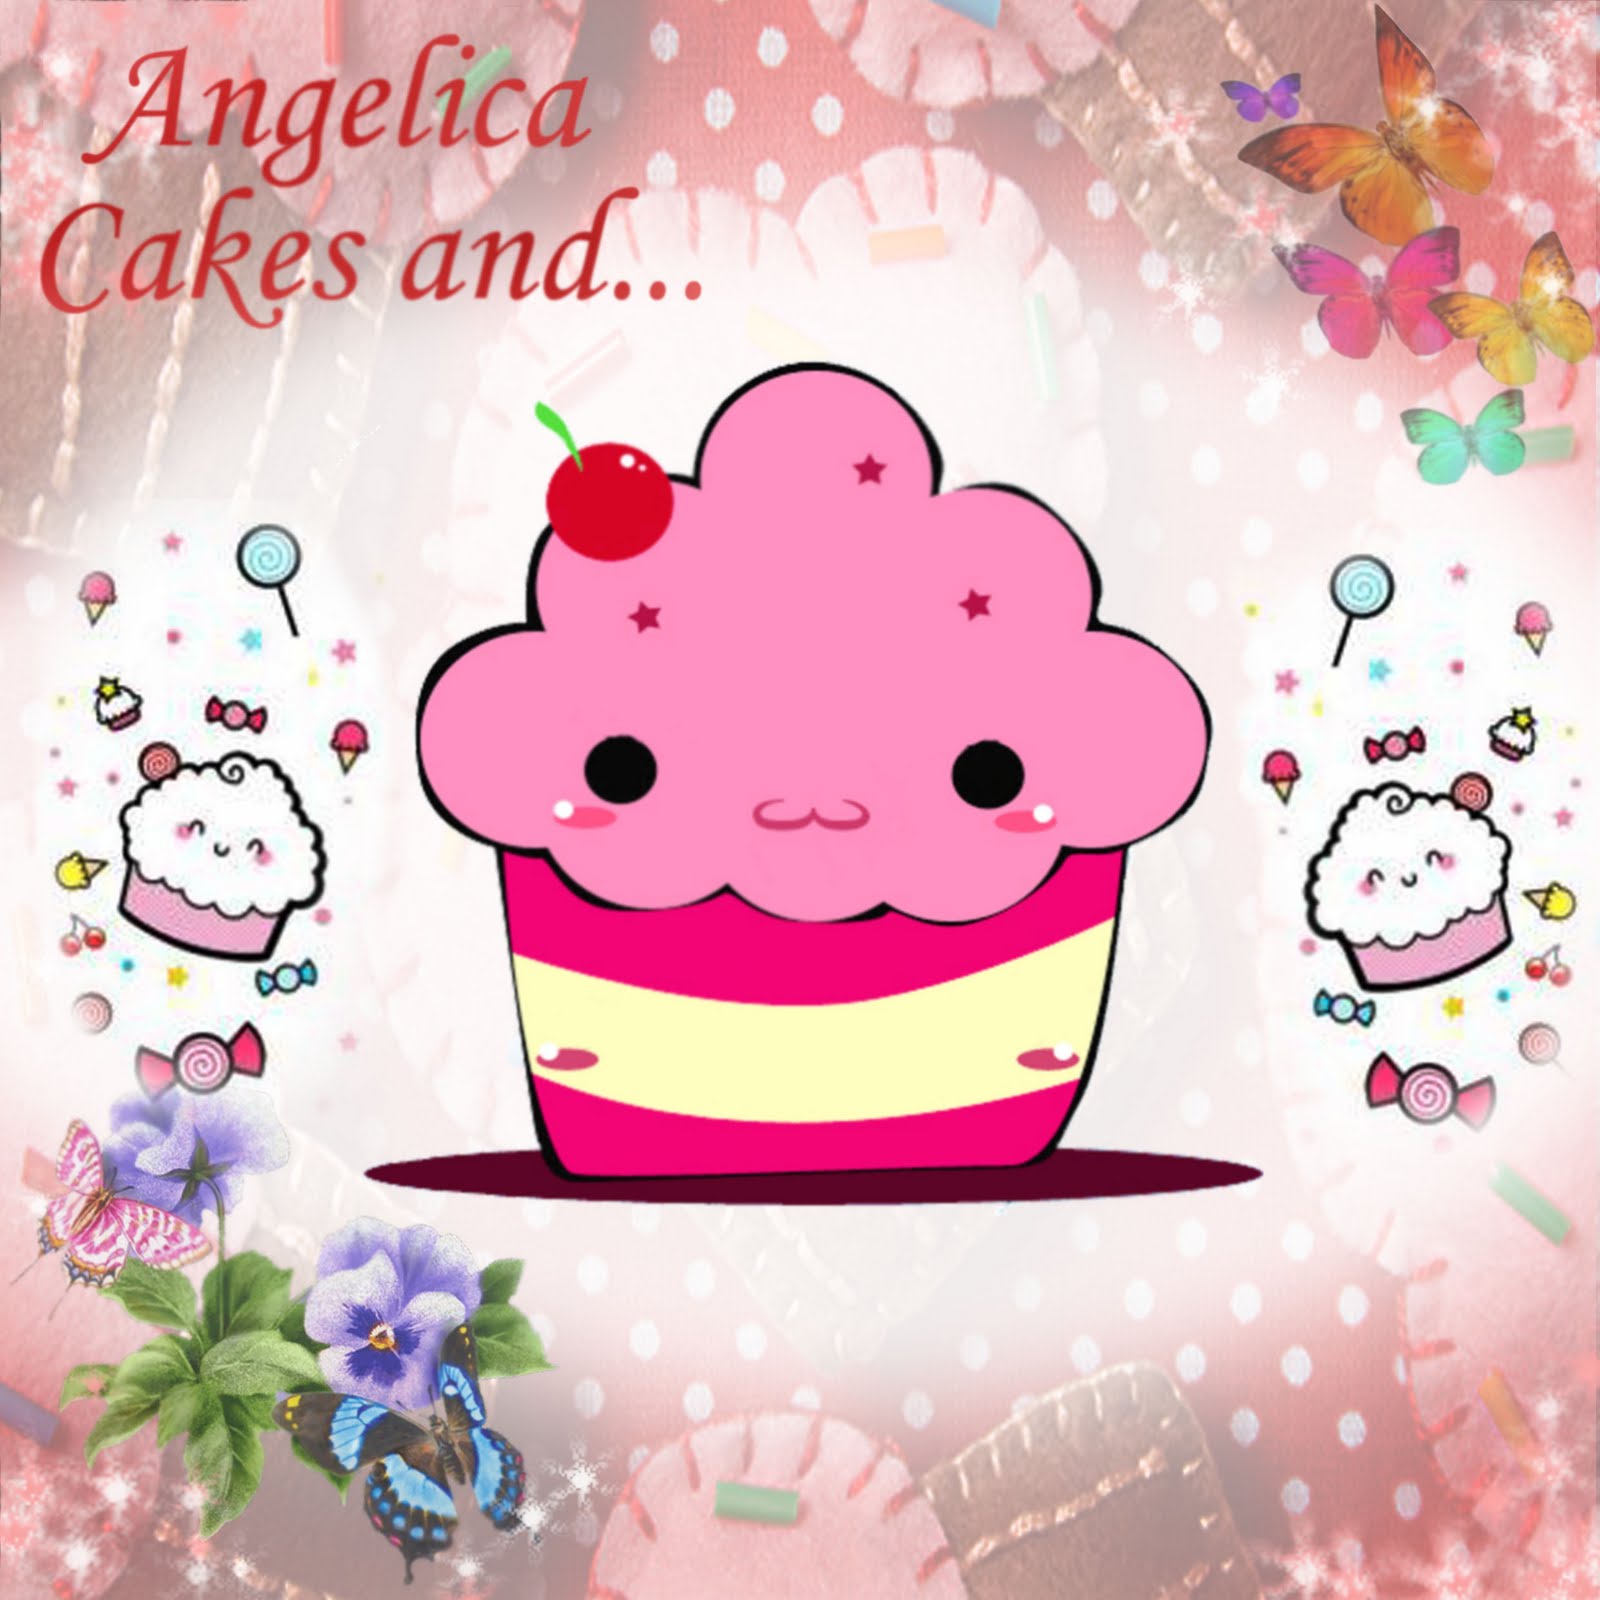 Angelica Cakes and...